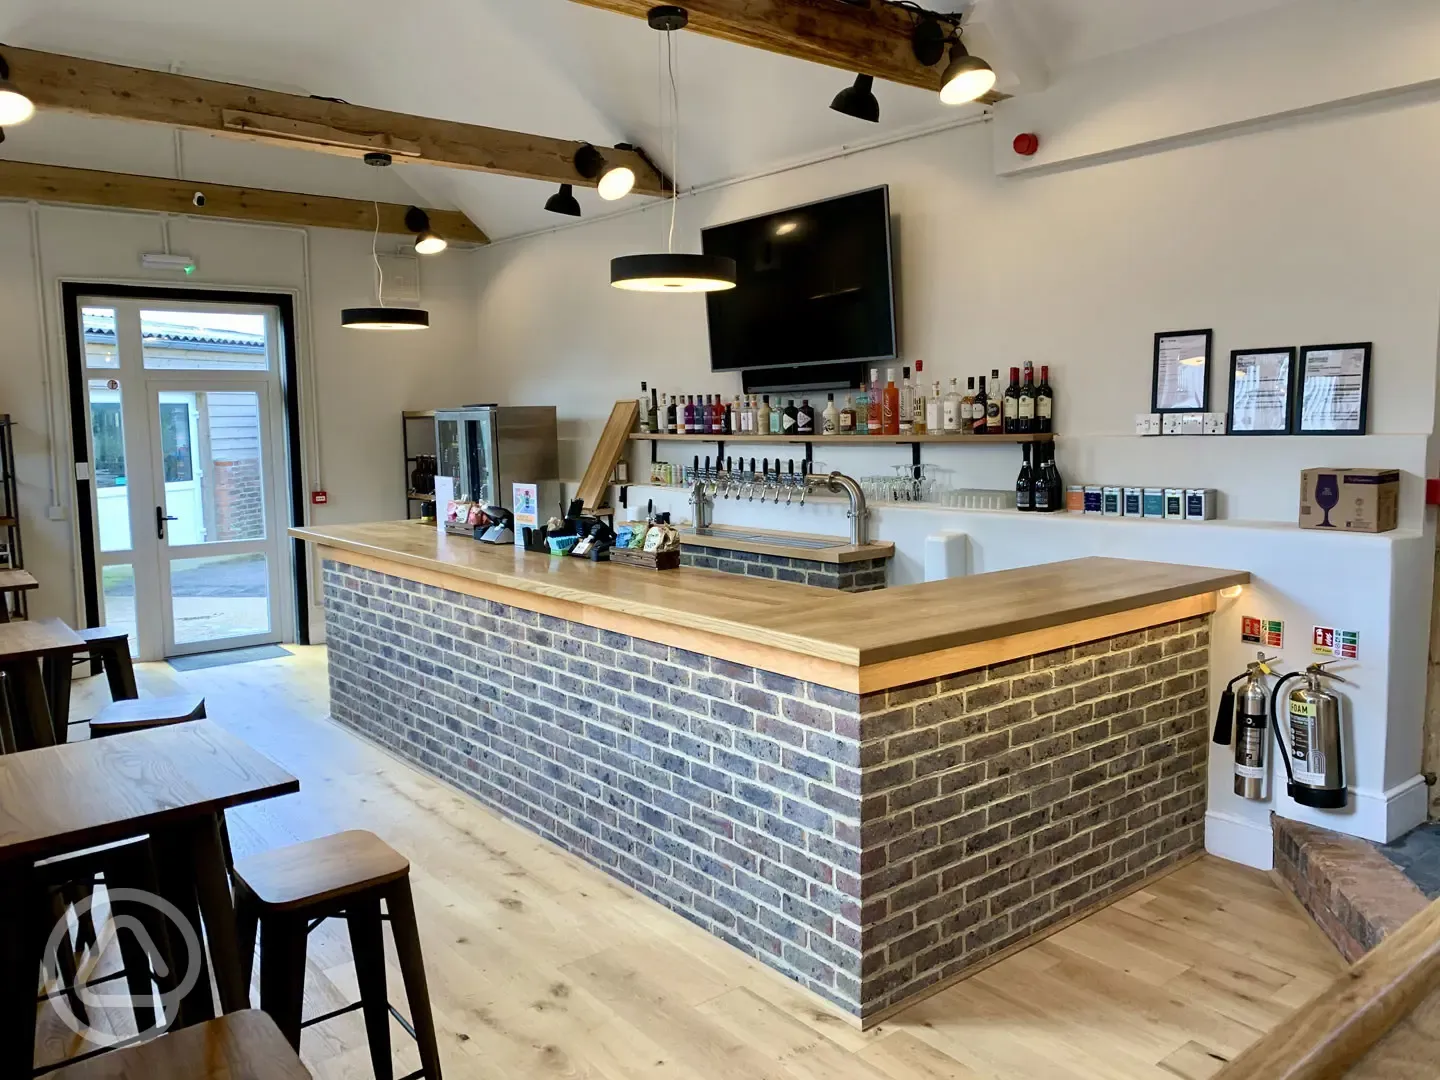 The tap room